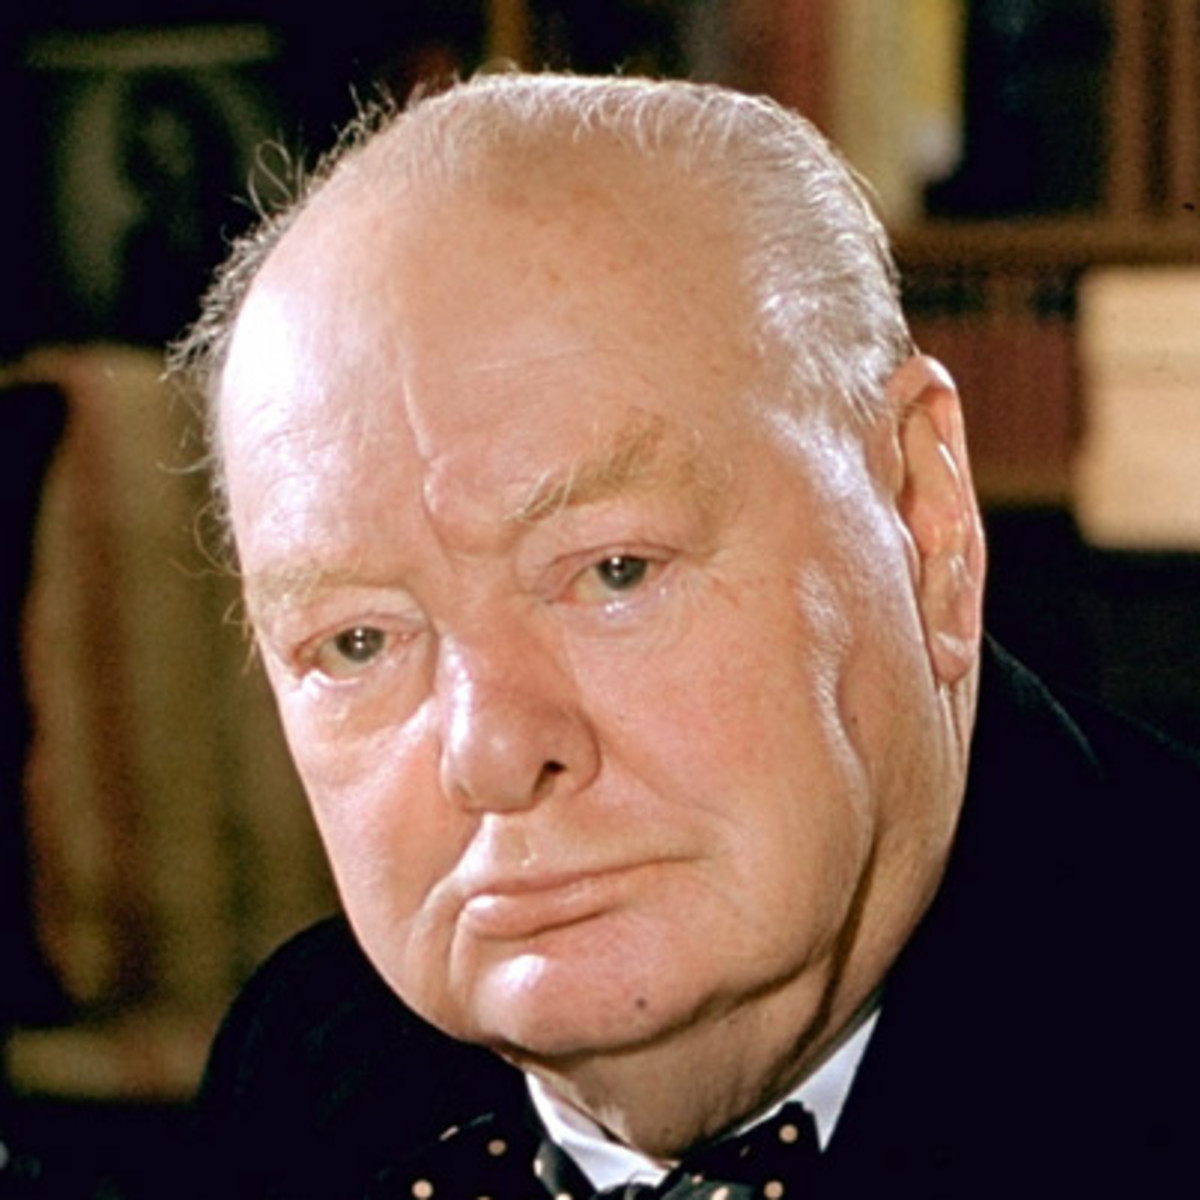 The Independent: Churchill was a politically complex man – but he was certainly a racist